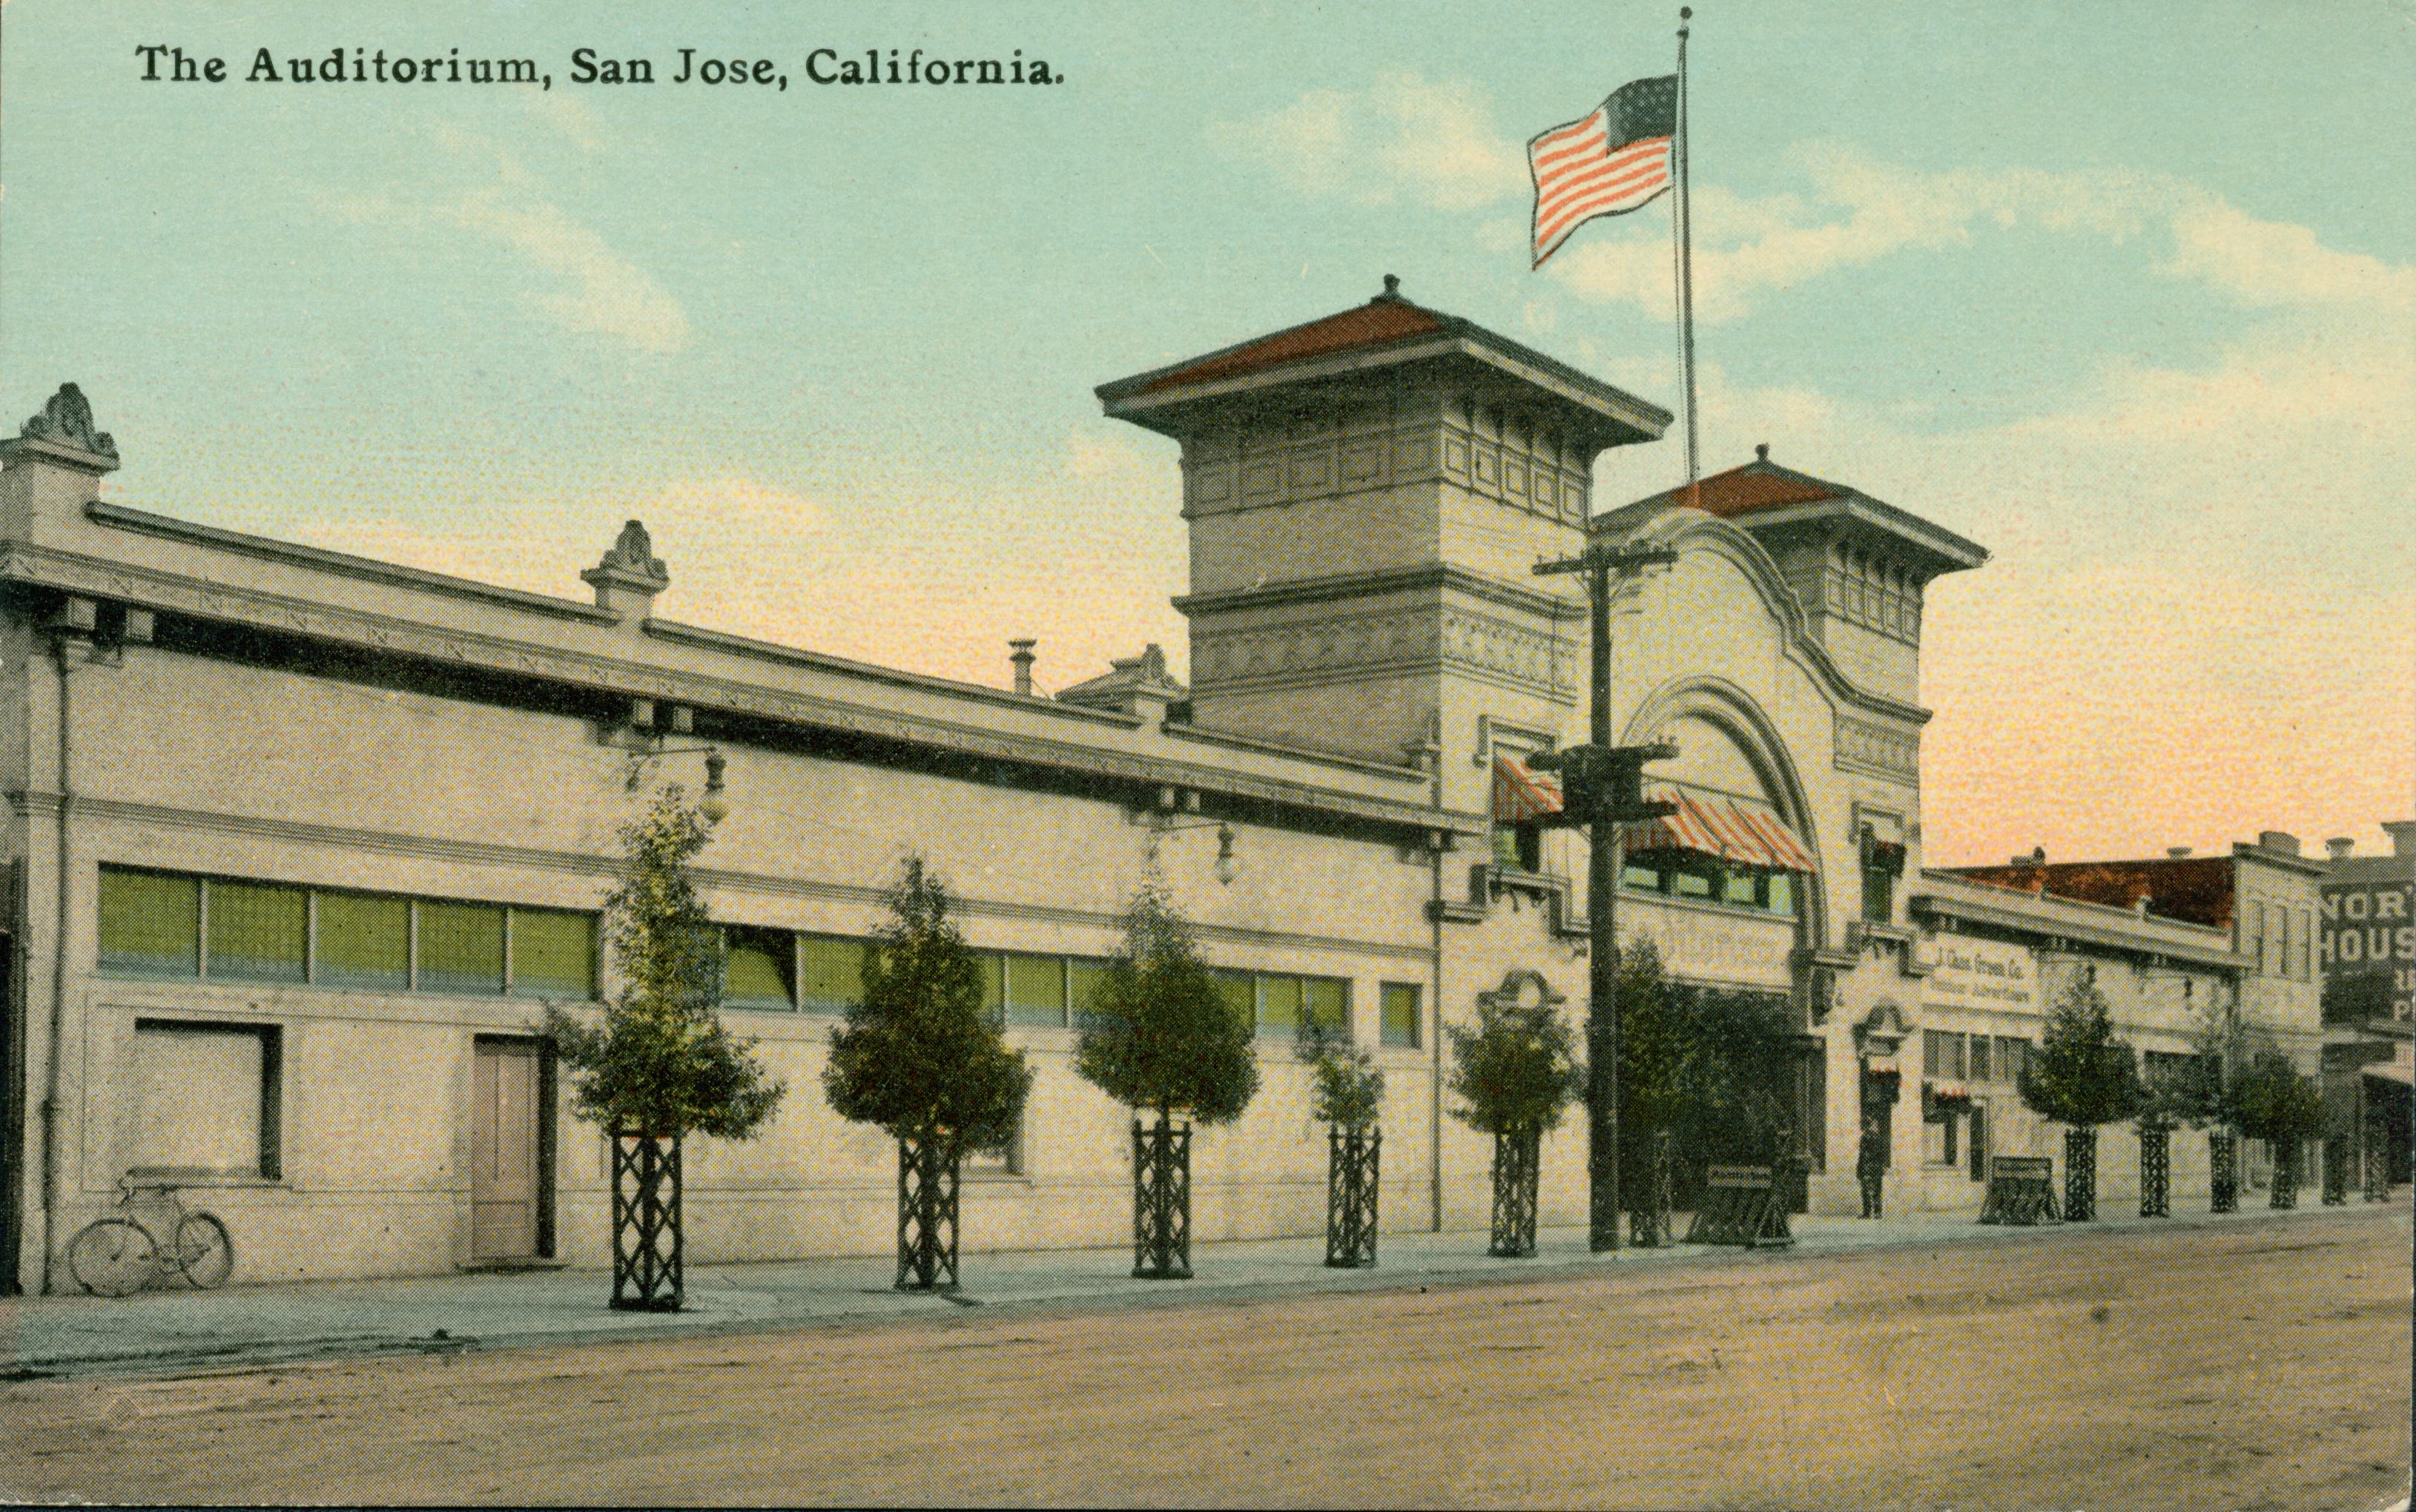 Exterior view of Auditorium Pavilion, small tree lined street with flag on top of building